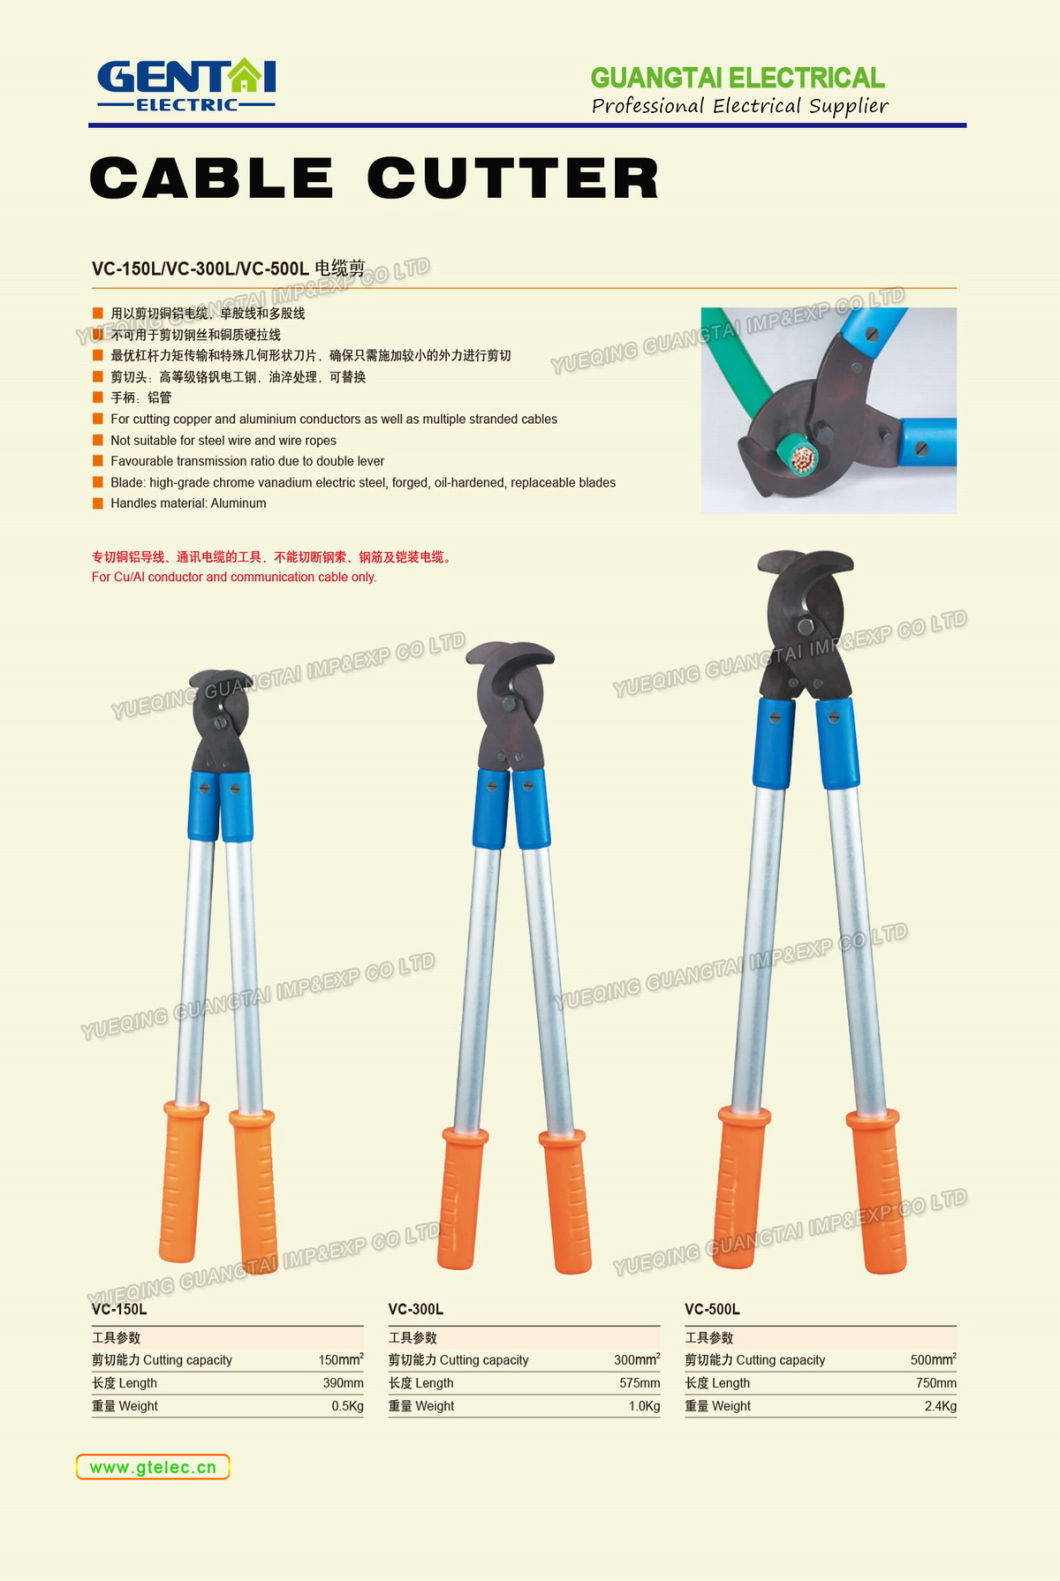 Cable Cutter for Cu/Al Conductor and Communication Cable Only